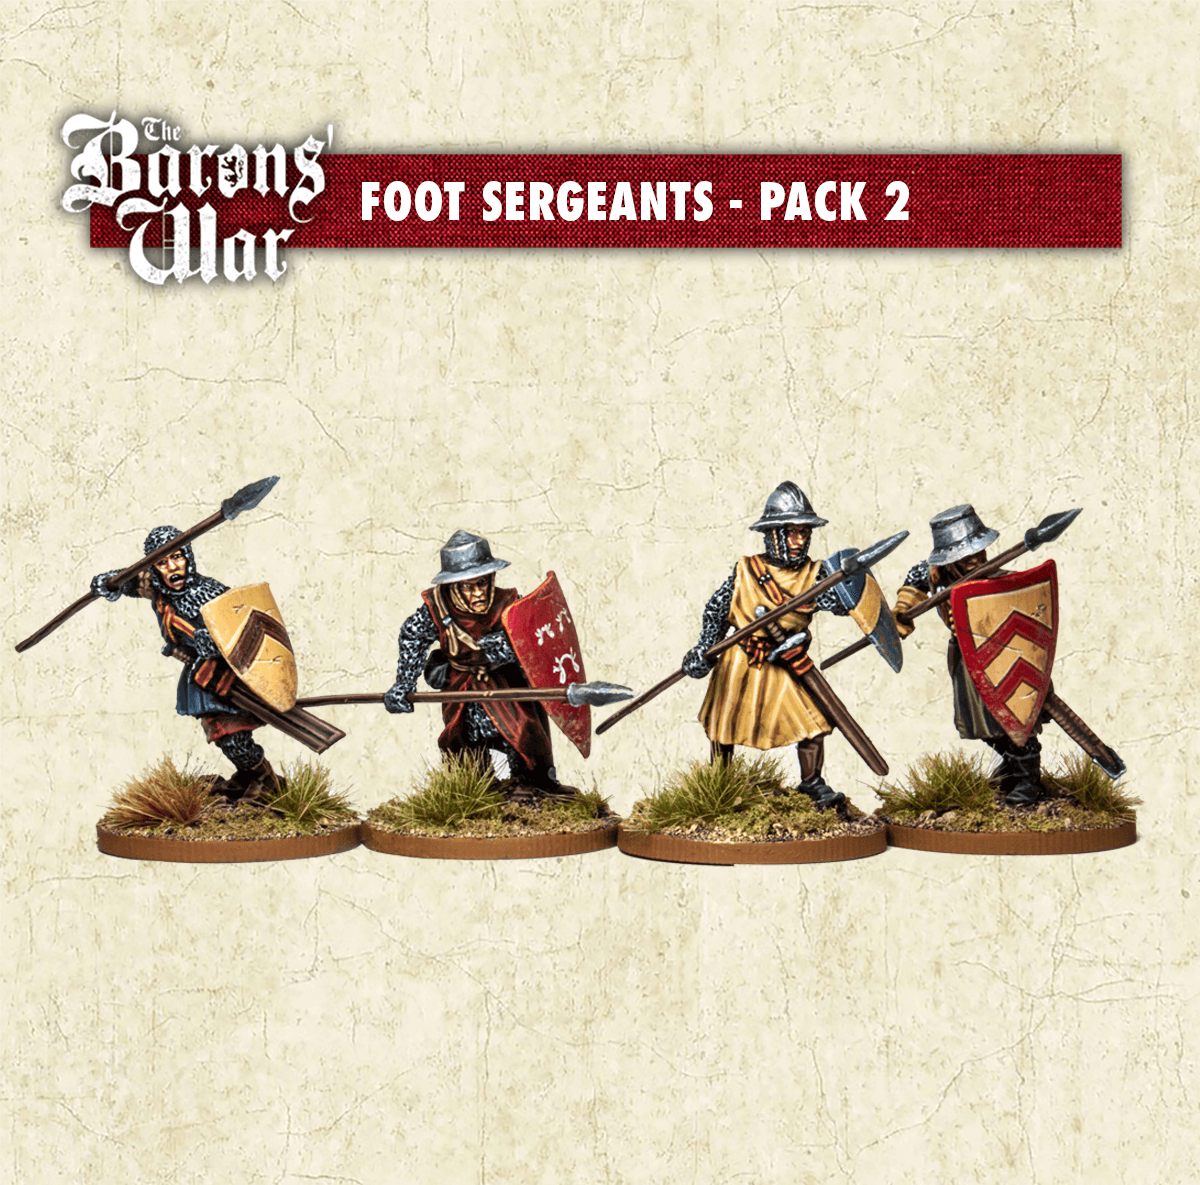 Foot Sergeants with Spears 1 Footsore medieval historical miniatures